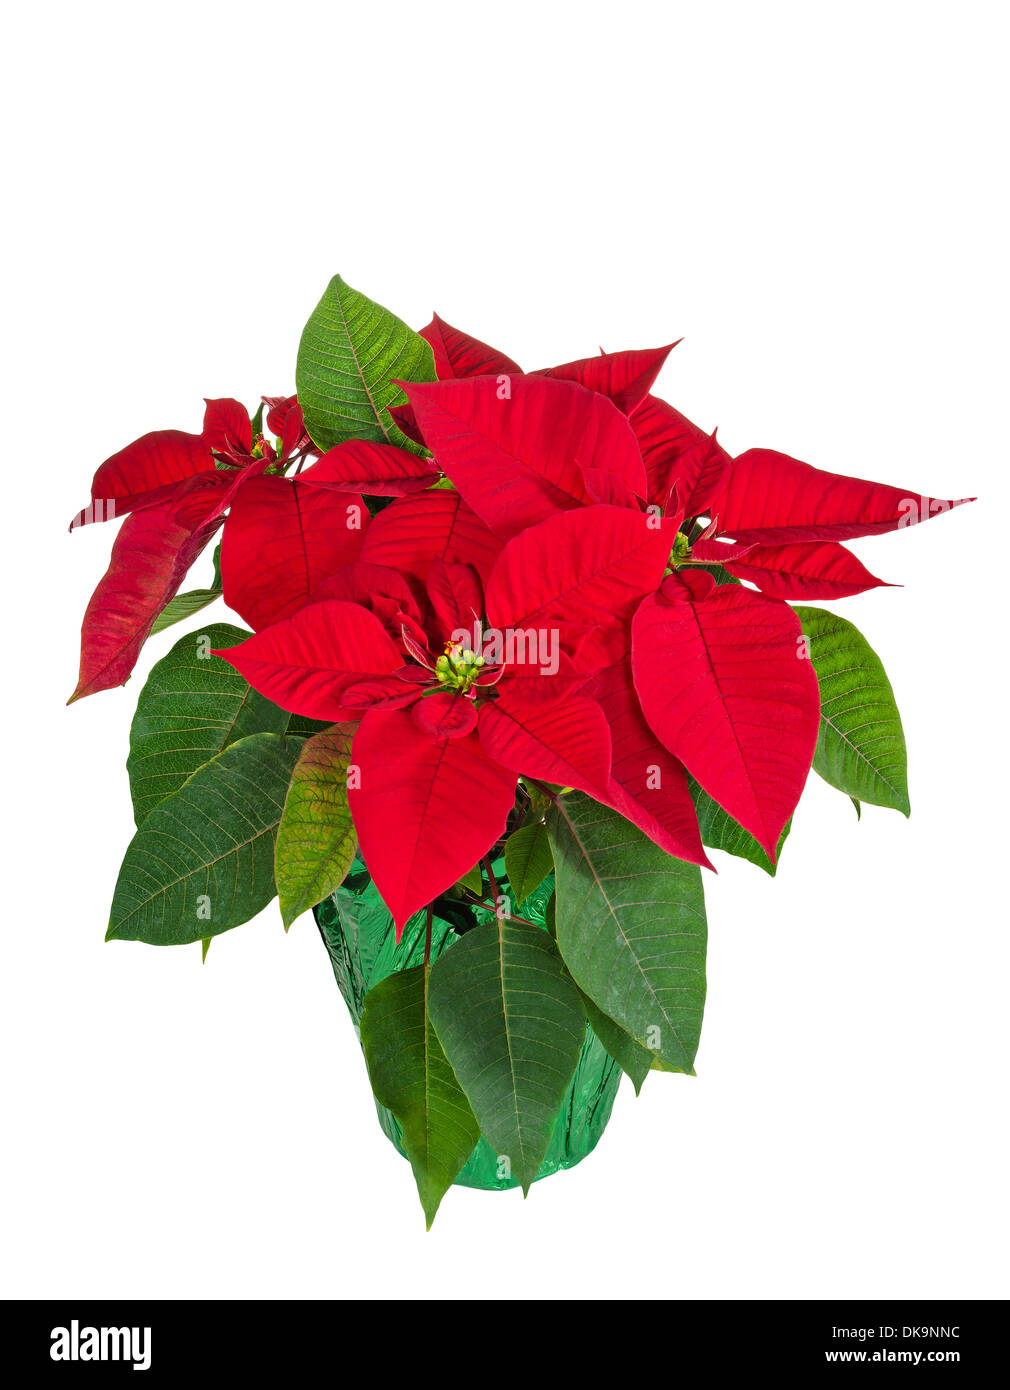 Red poinsettia (Euphorbia pulcherrima) in a flower pot, isolated Stock Photo